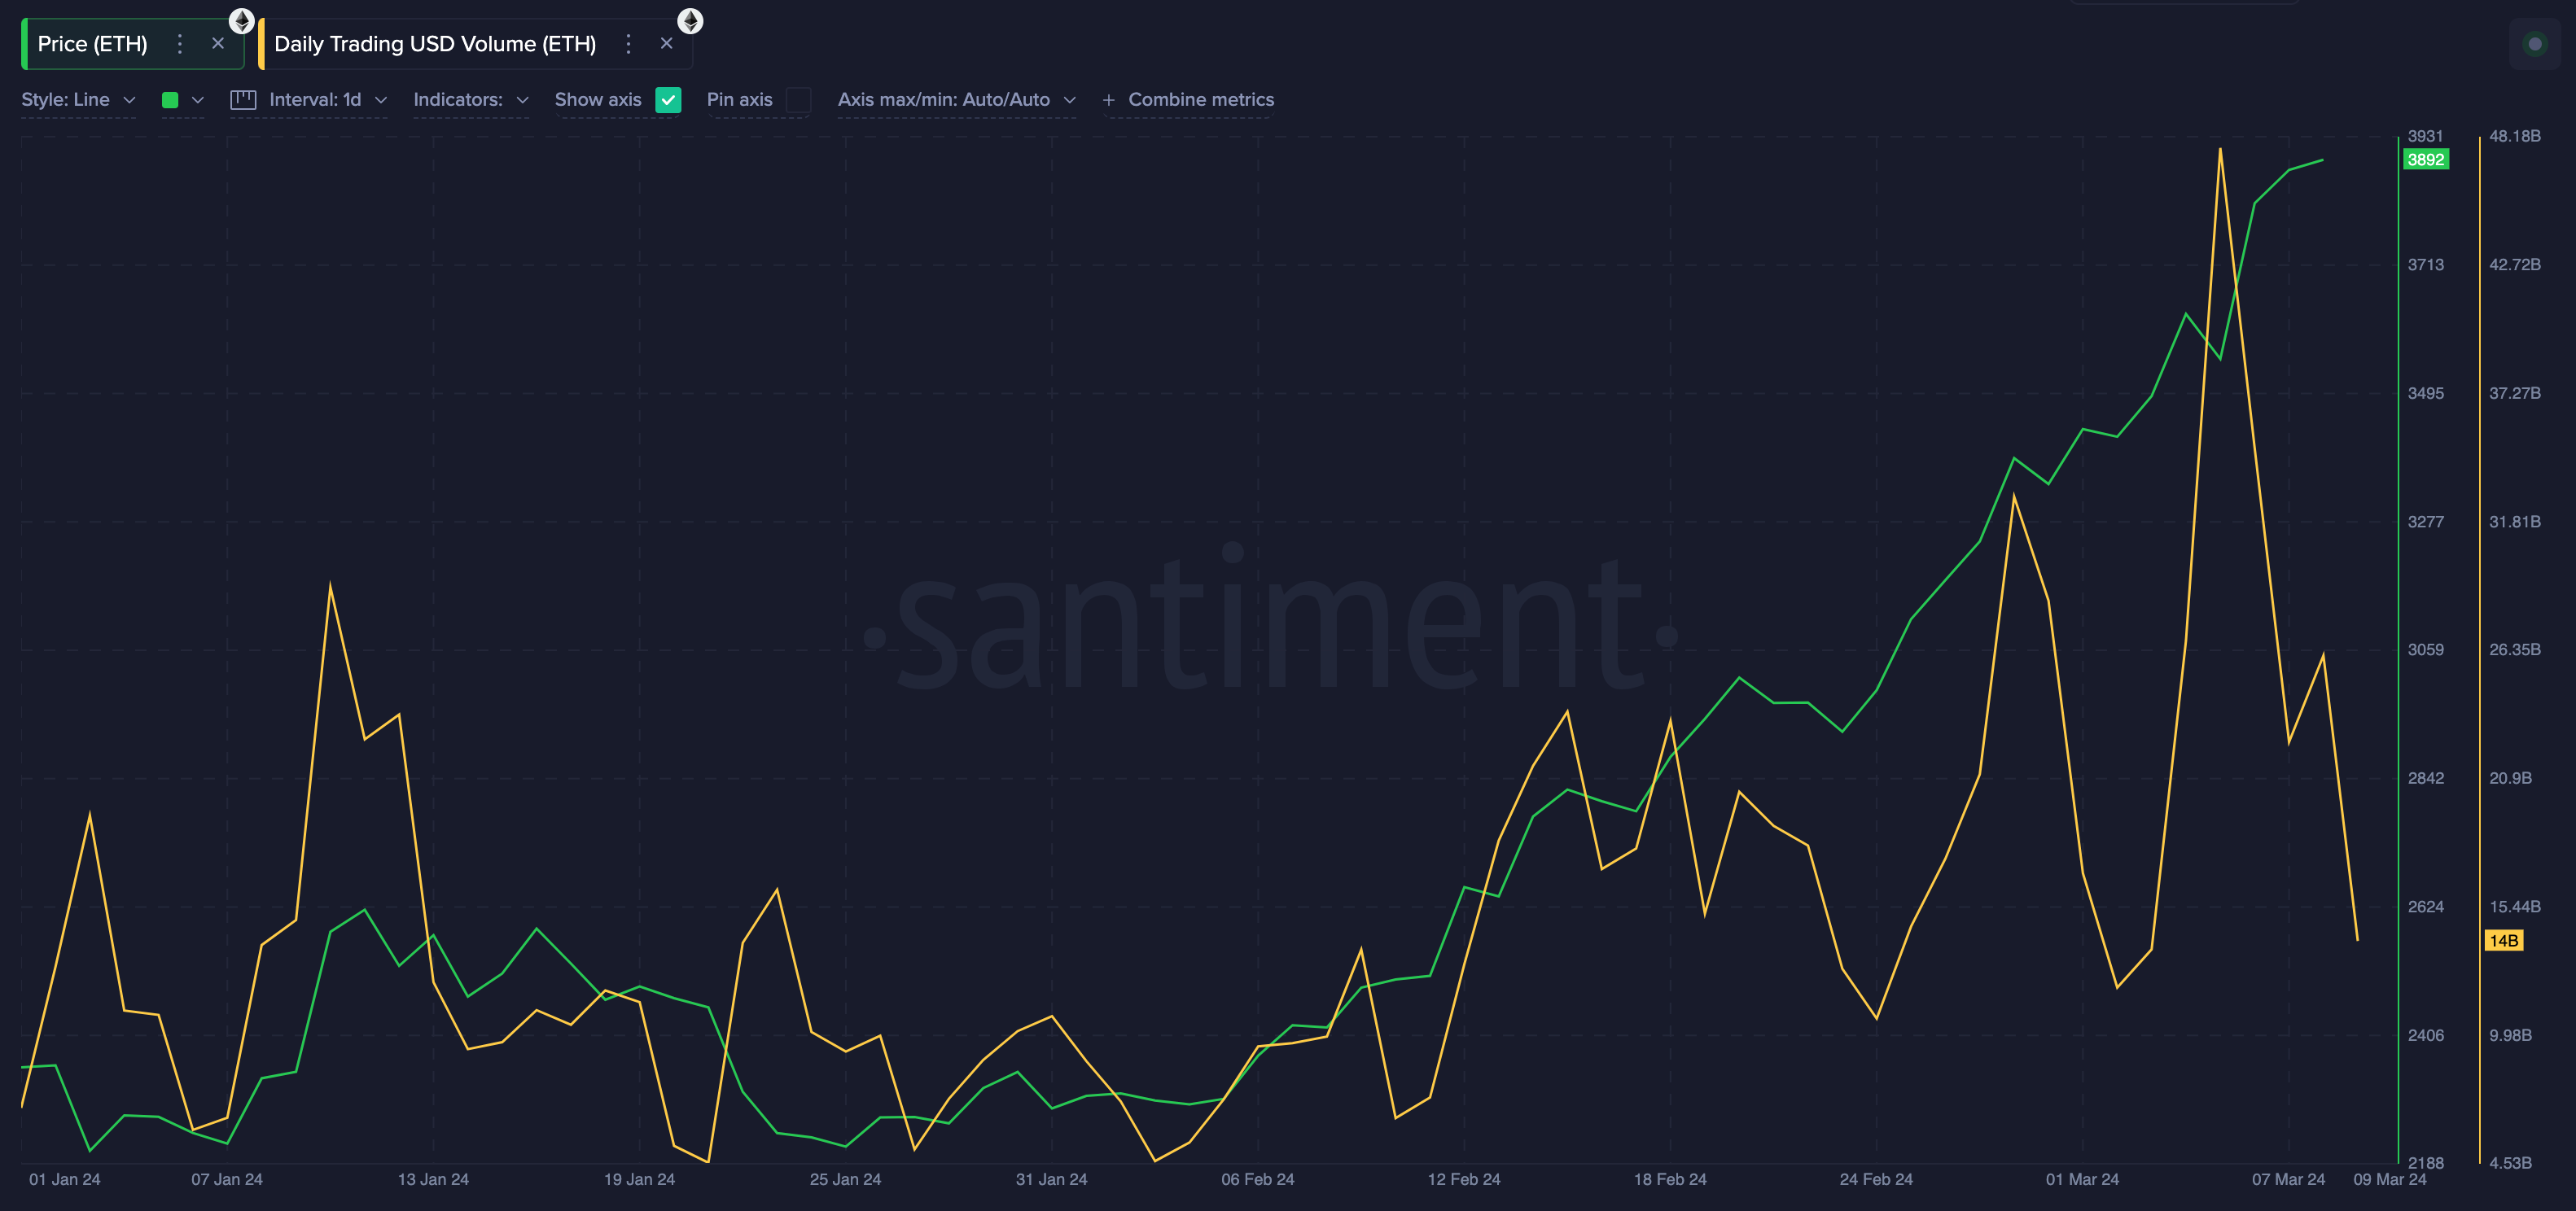 Ethereum (ETH) Daily Trading Volume vs. Price | Source: Santiment